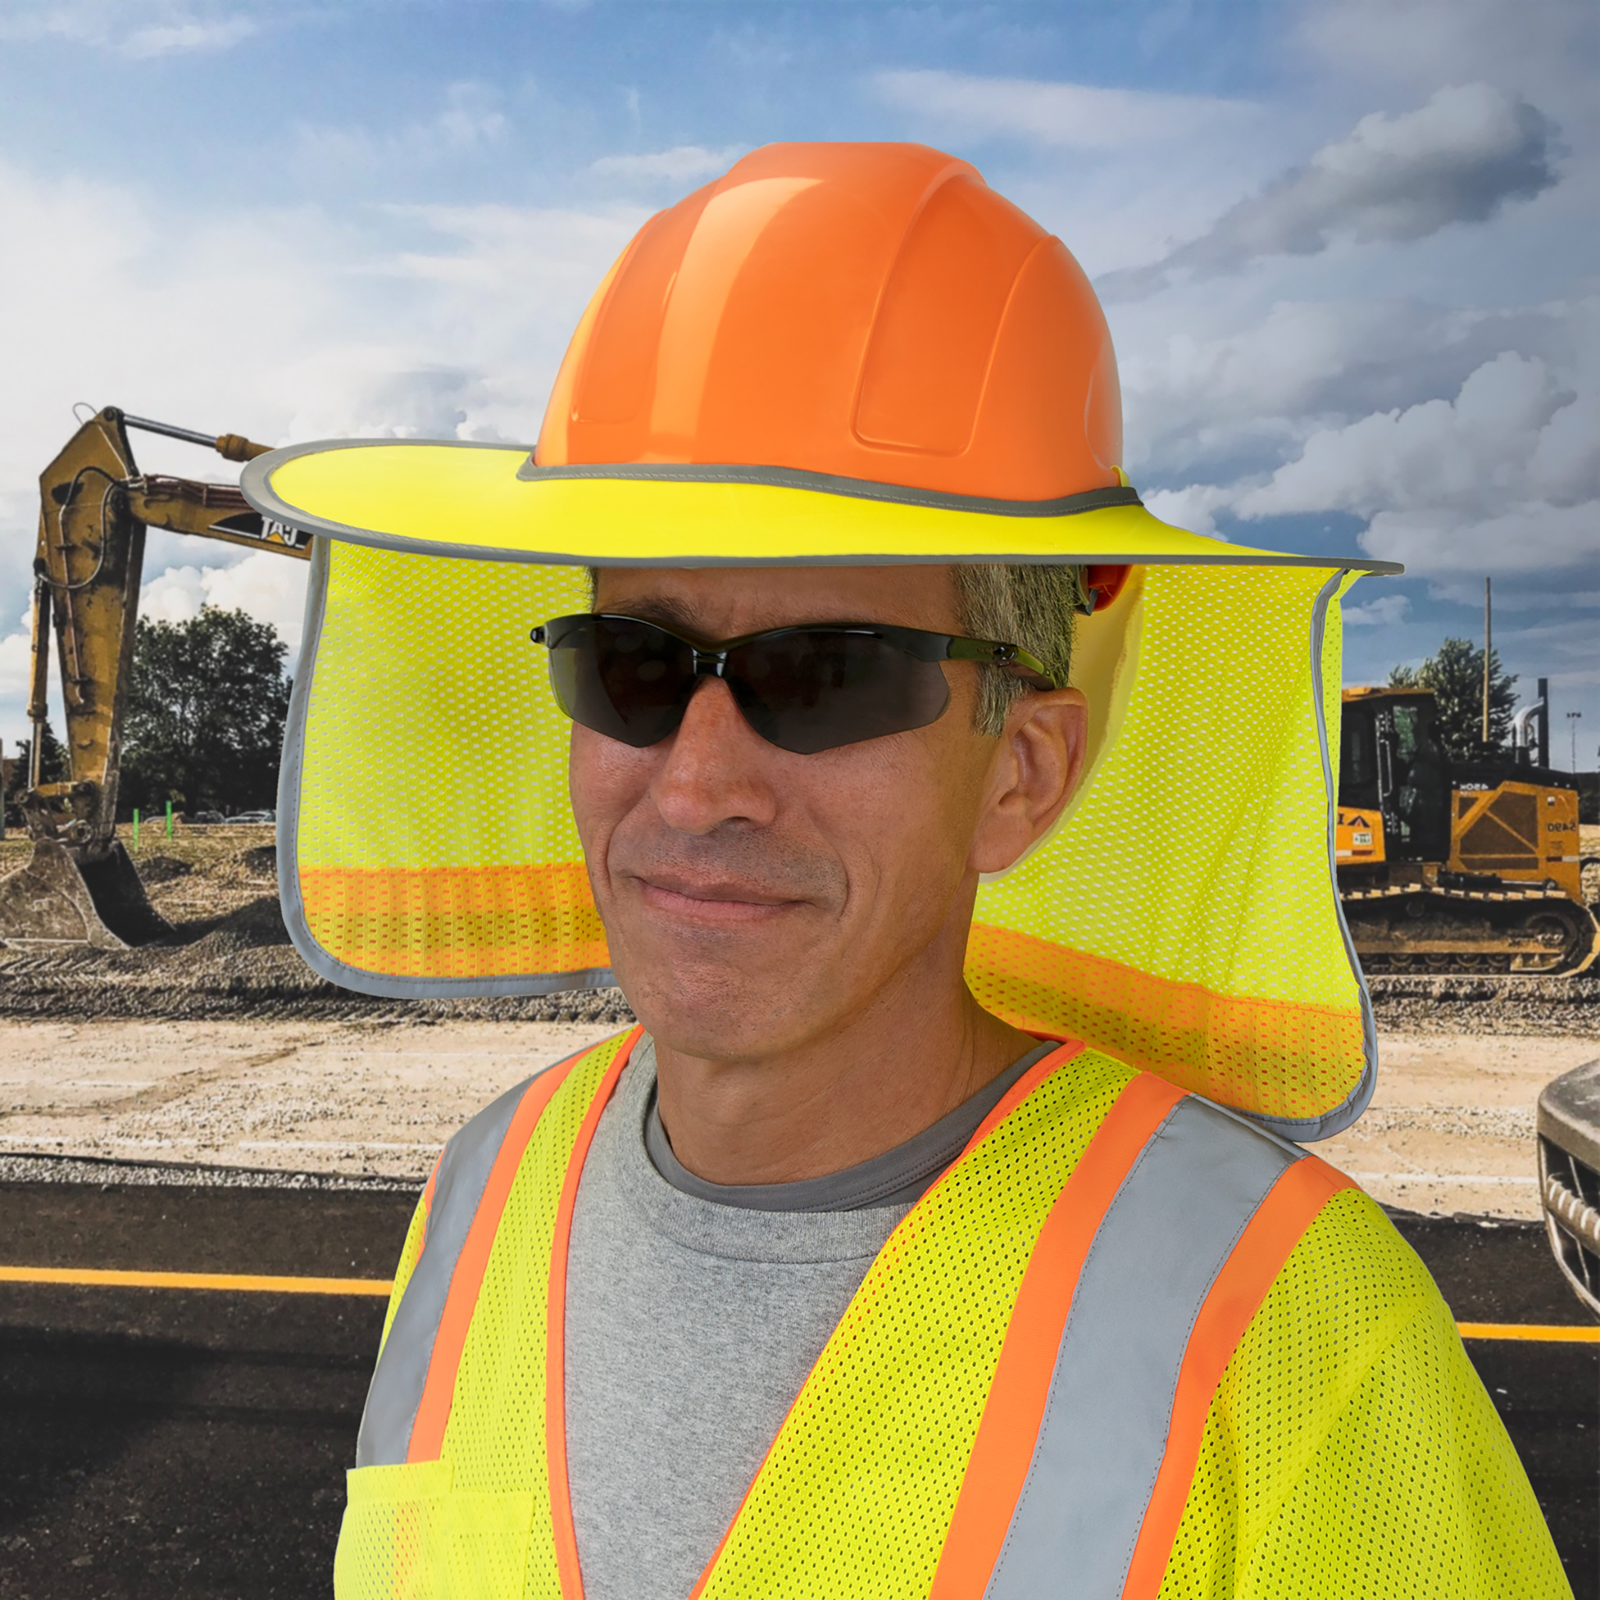 Image of a man using an orange full brim hard hat with a JORESTECH sun shield installed while he is in a construction on the road